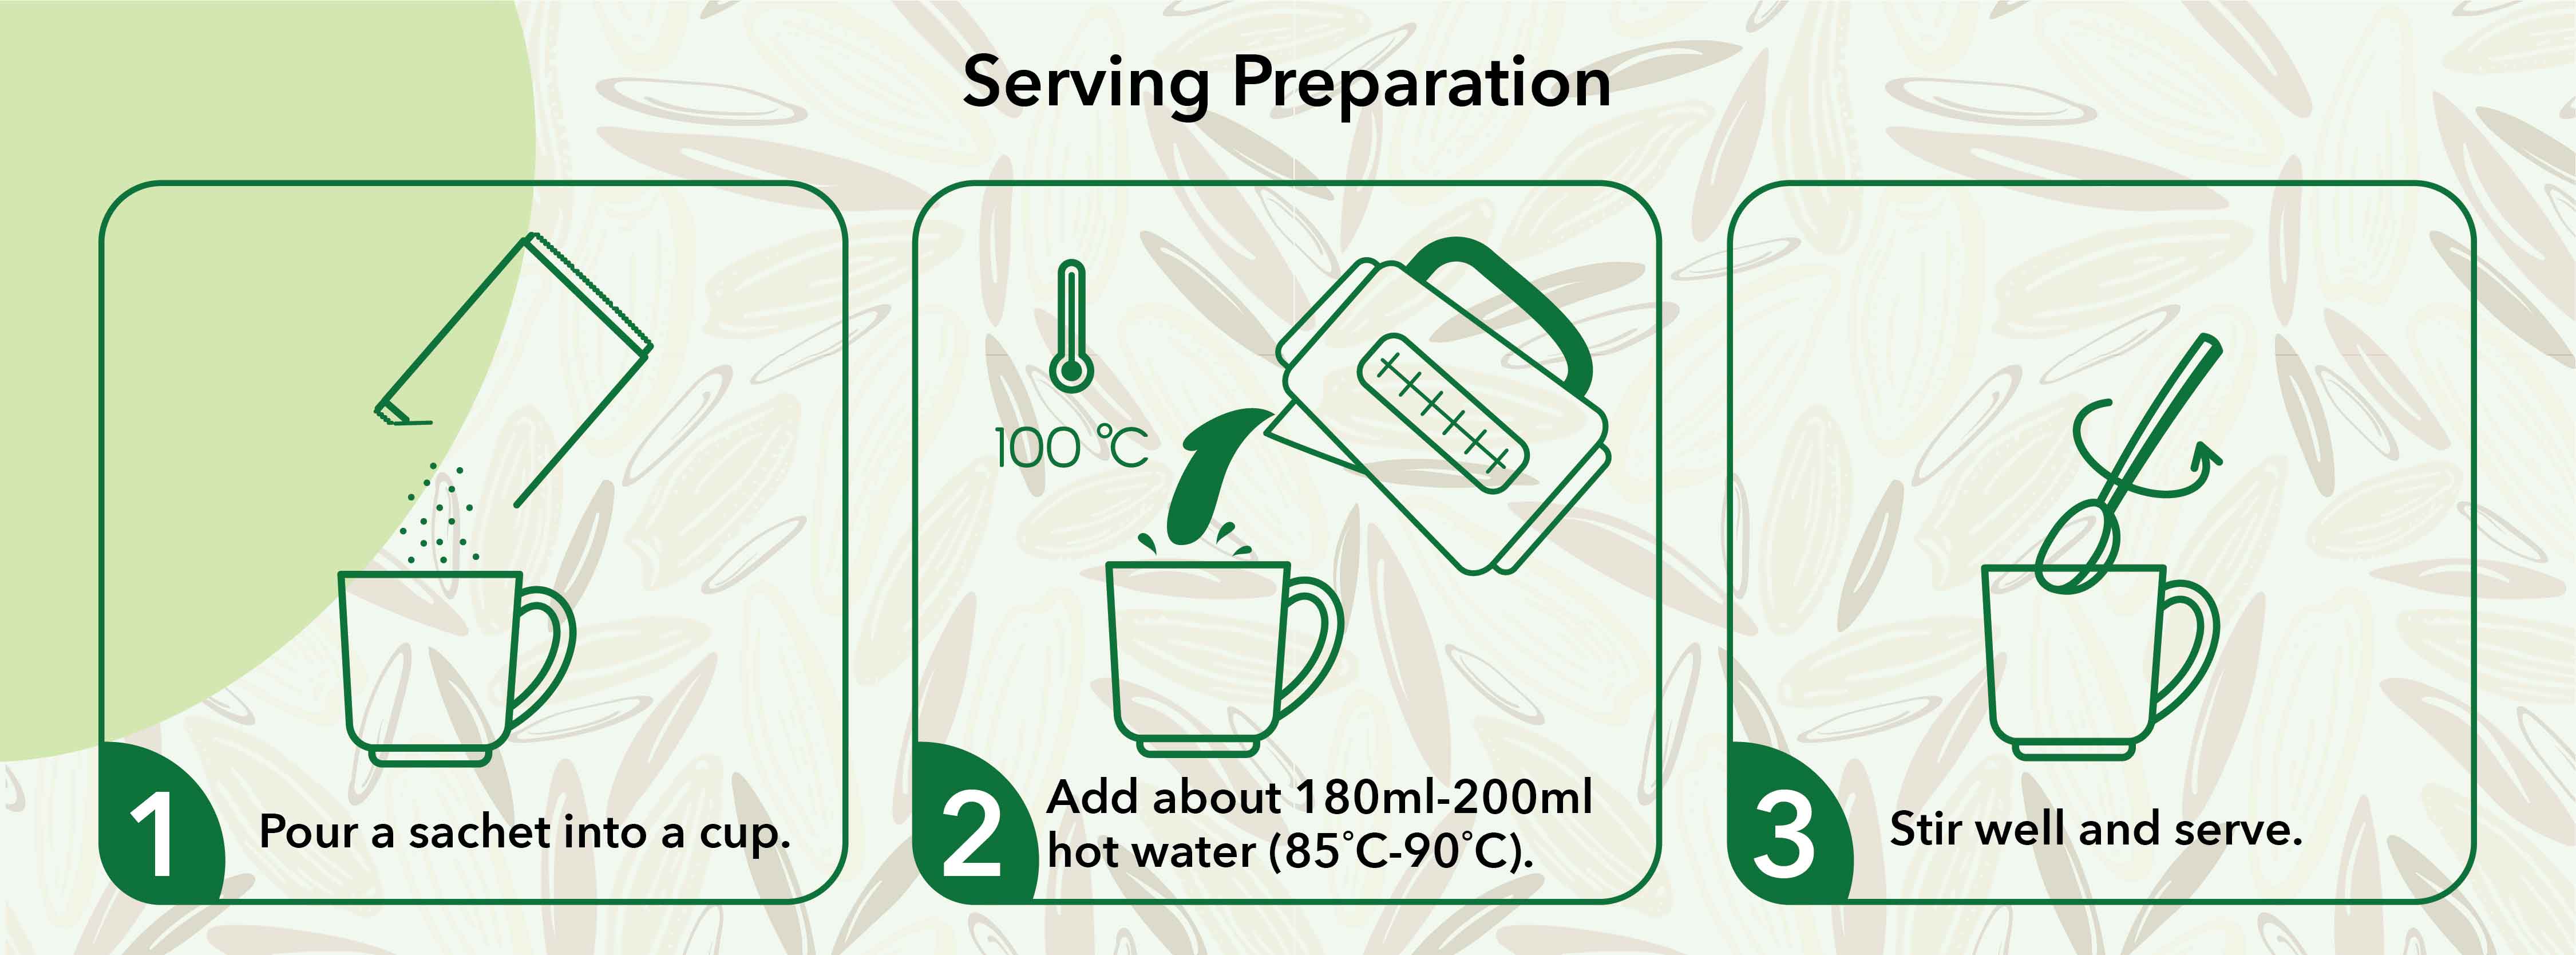 how to prepare drinks